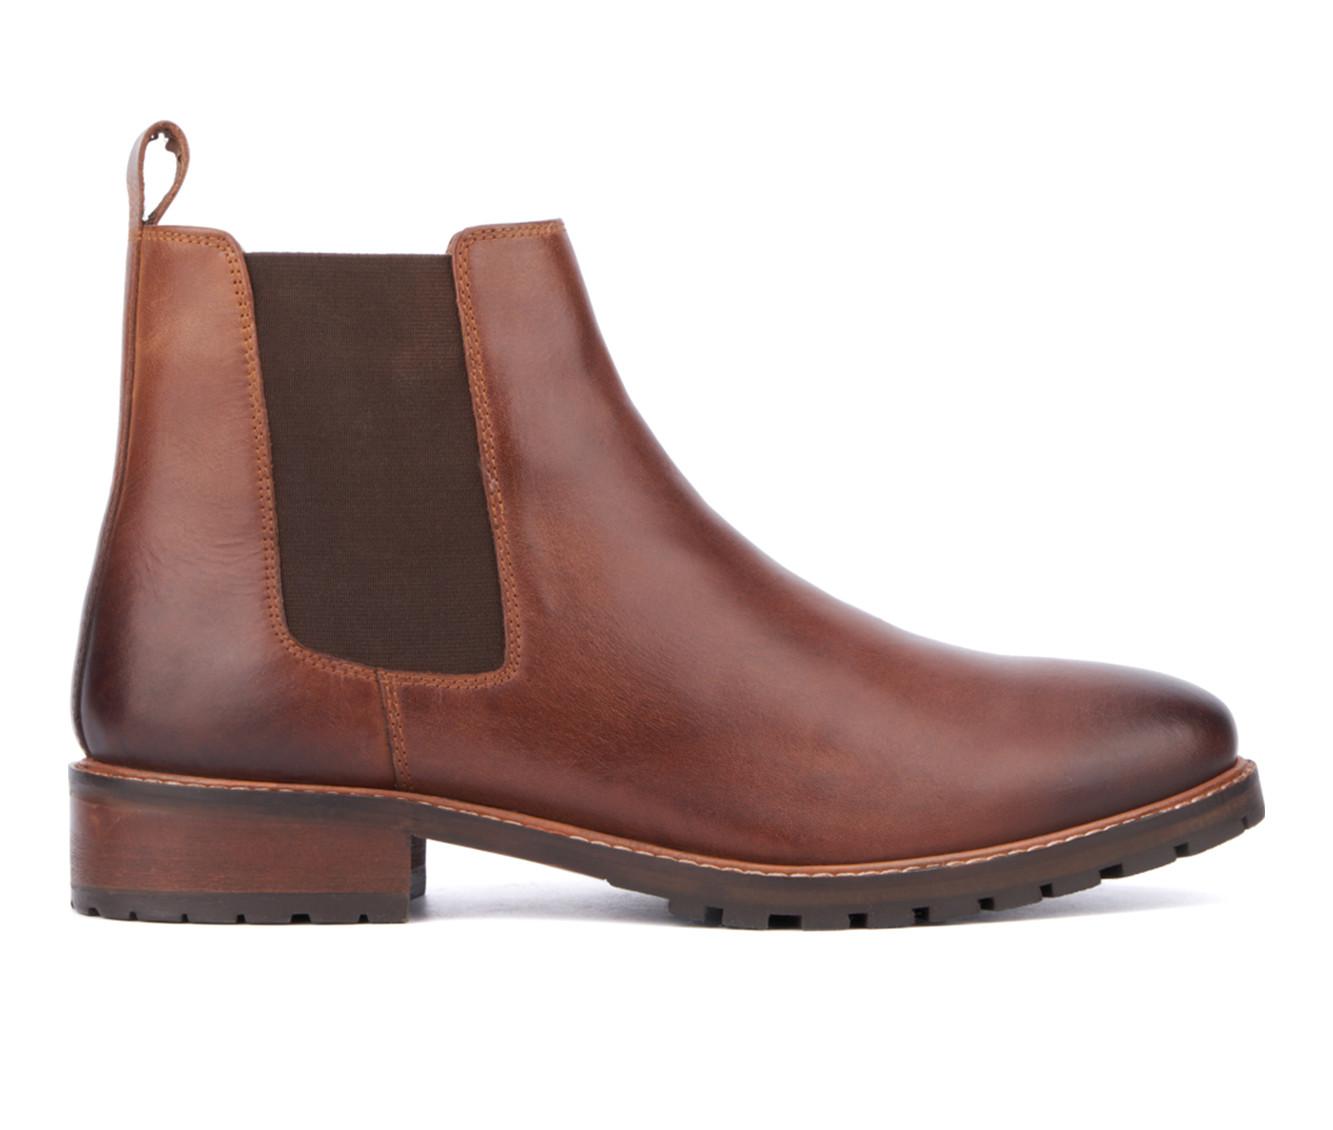 Theo chelsea boots